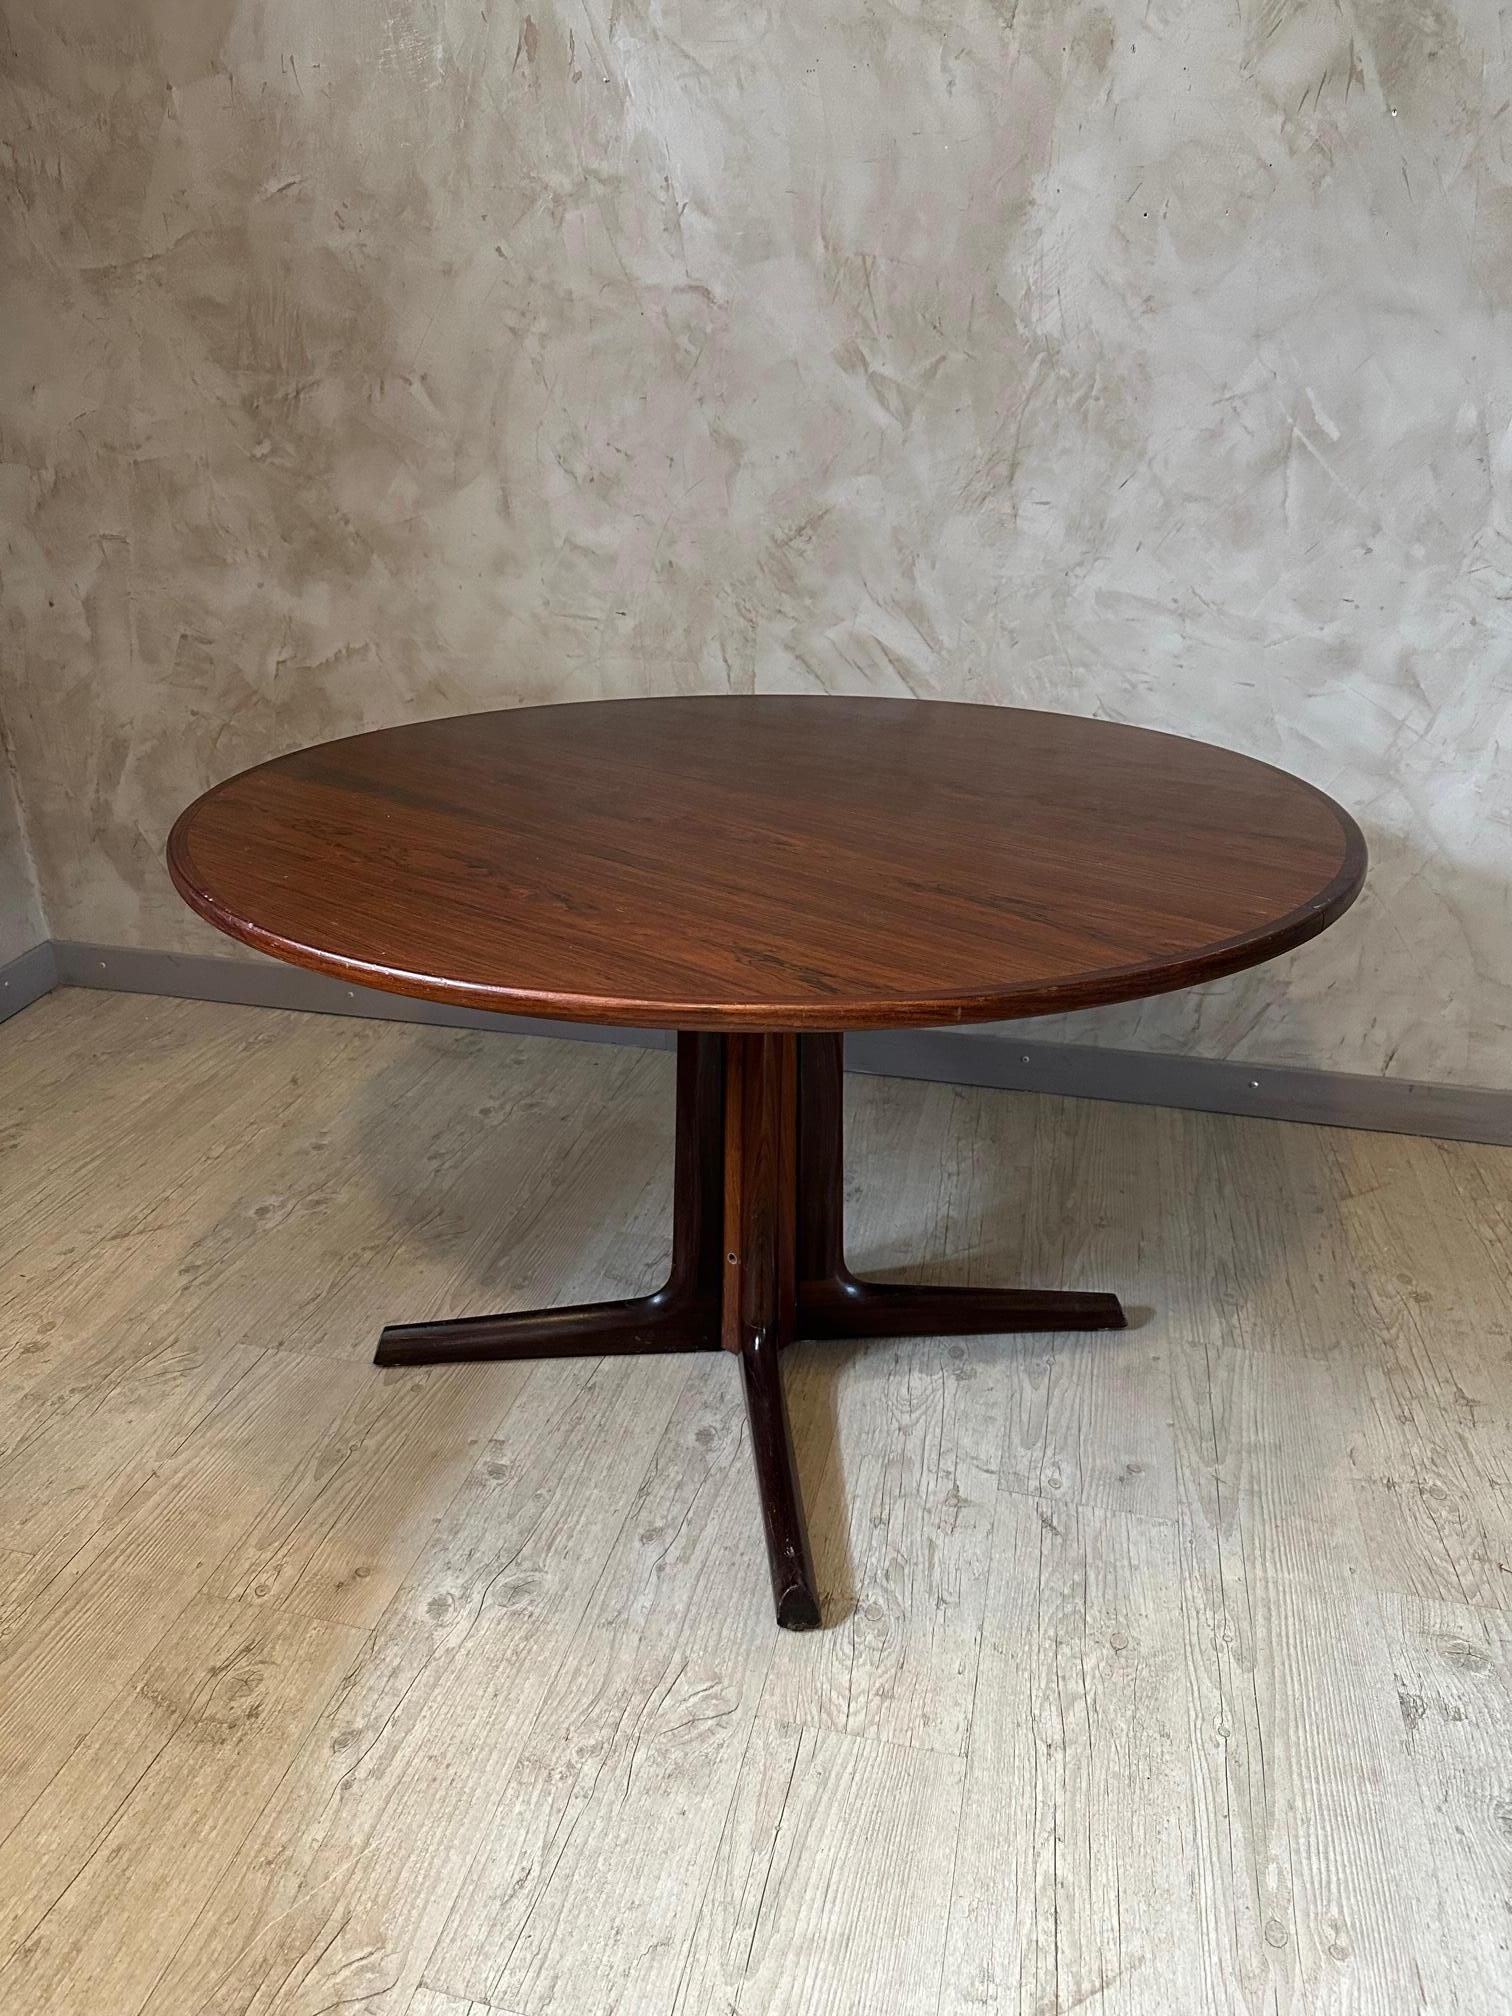 Very nice round teak table from the 60s made by a Danish designer (label below). Cross base.
Extension missing. Very good quality and good condition.
For lovers of design and decoration.